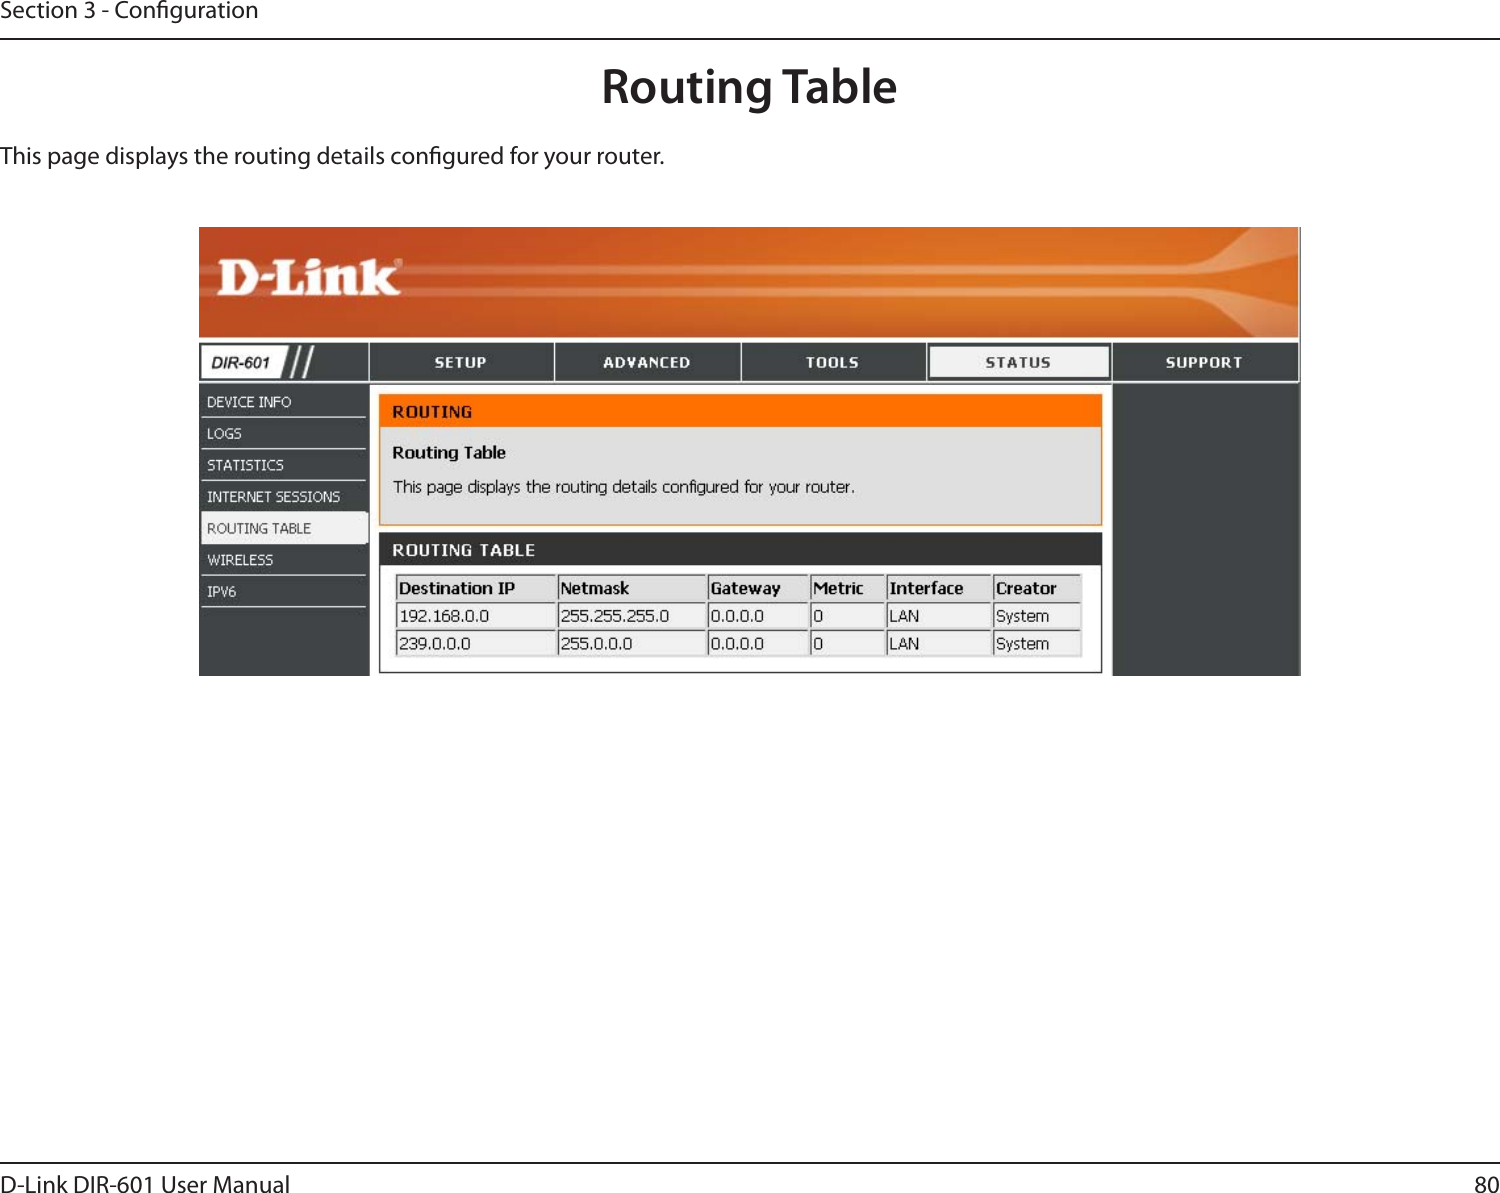 80D-Link DIR-601 User ManualSection 3 - CongurationThis page displays the routing details congured for your router.Routing Table